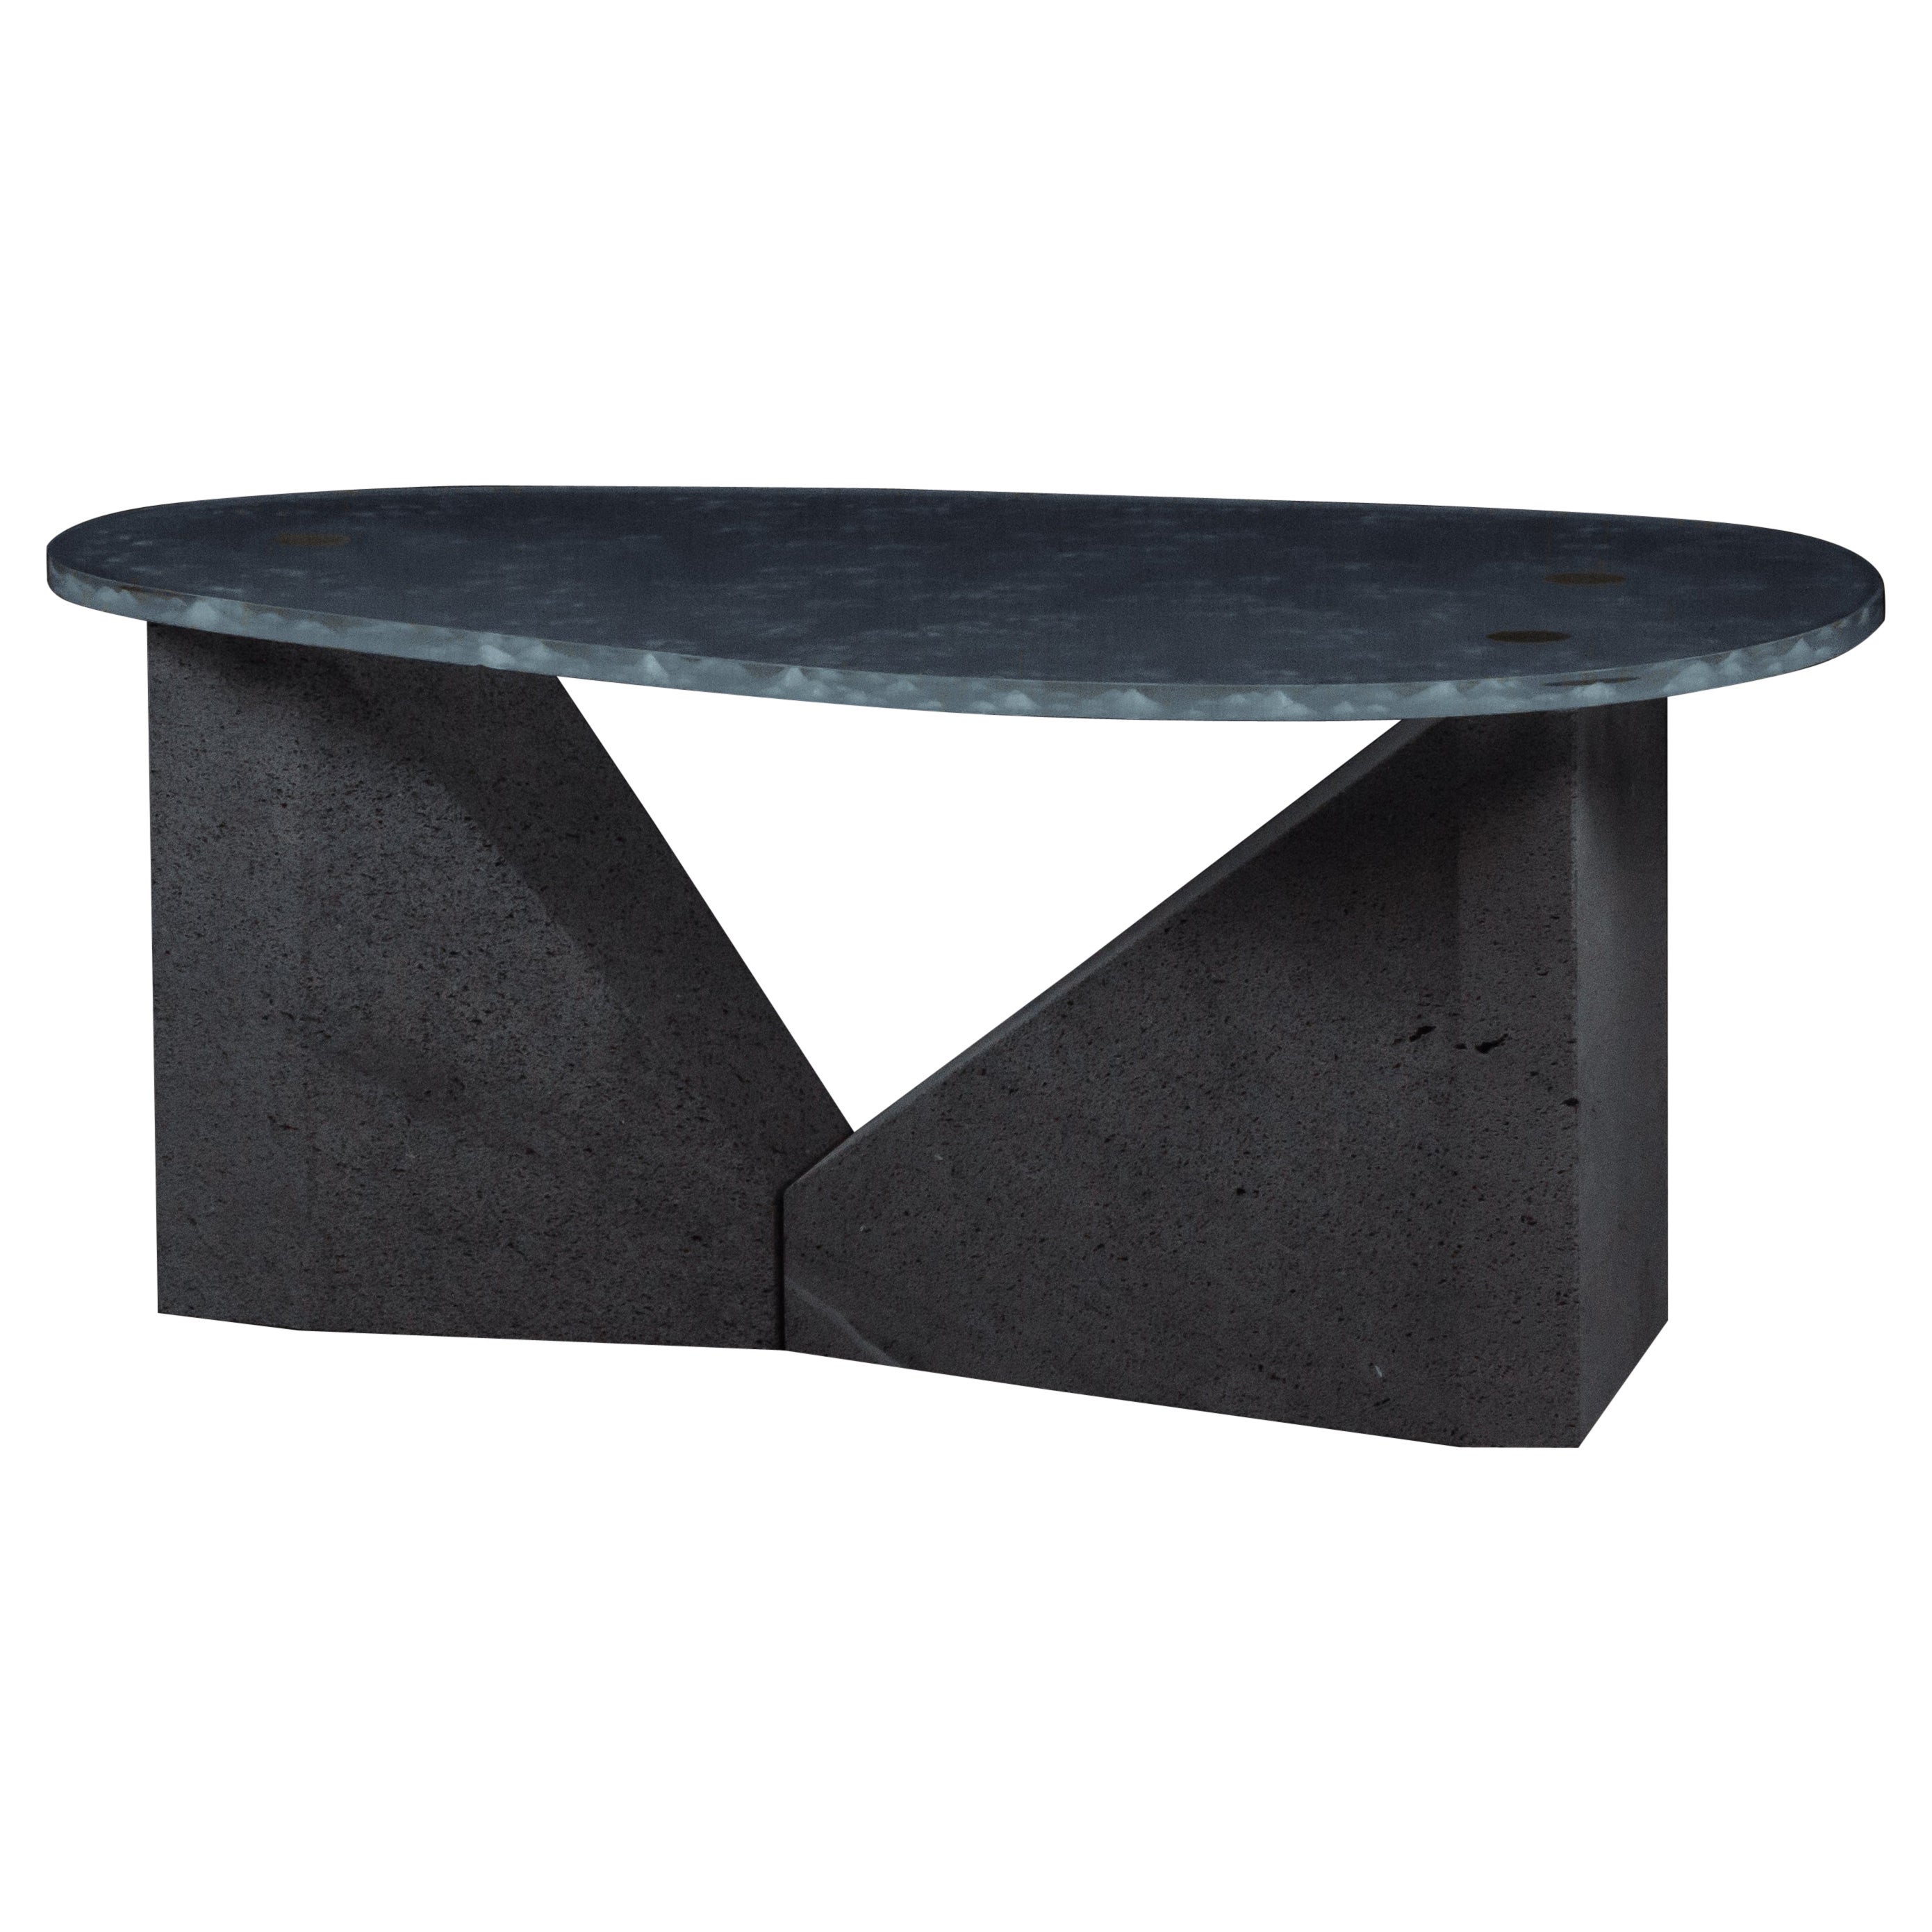 Bel Ava Table Glass and Lava Stone